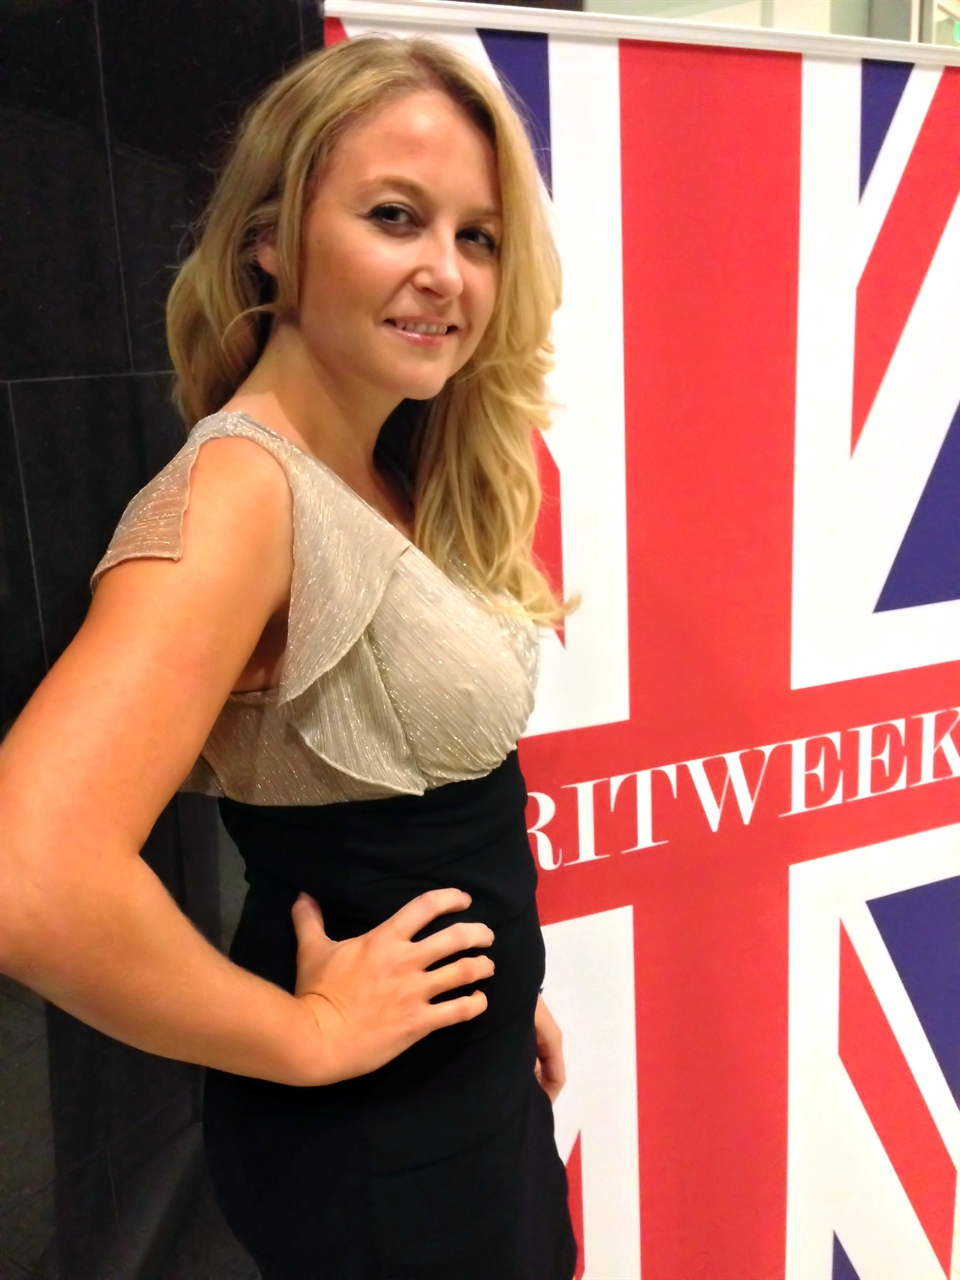 Janine attends one of Brit Weeks events at Filmmaker event taking place in Los Angeles.